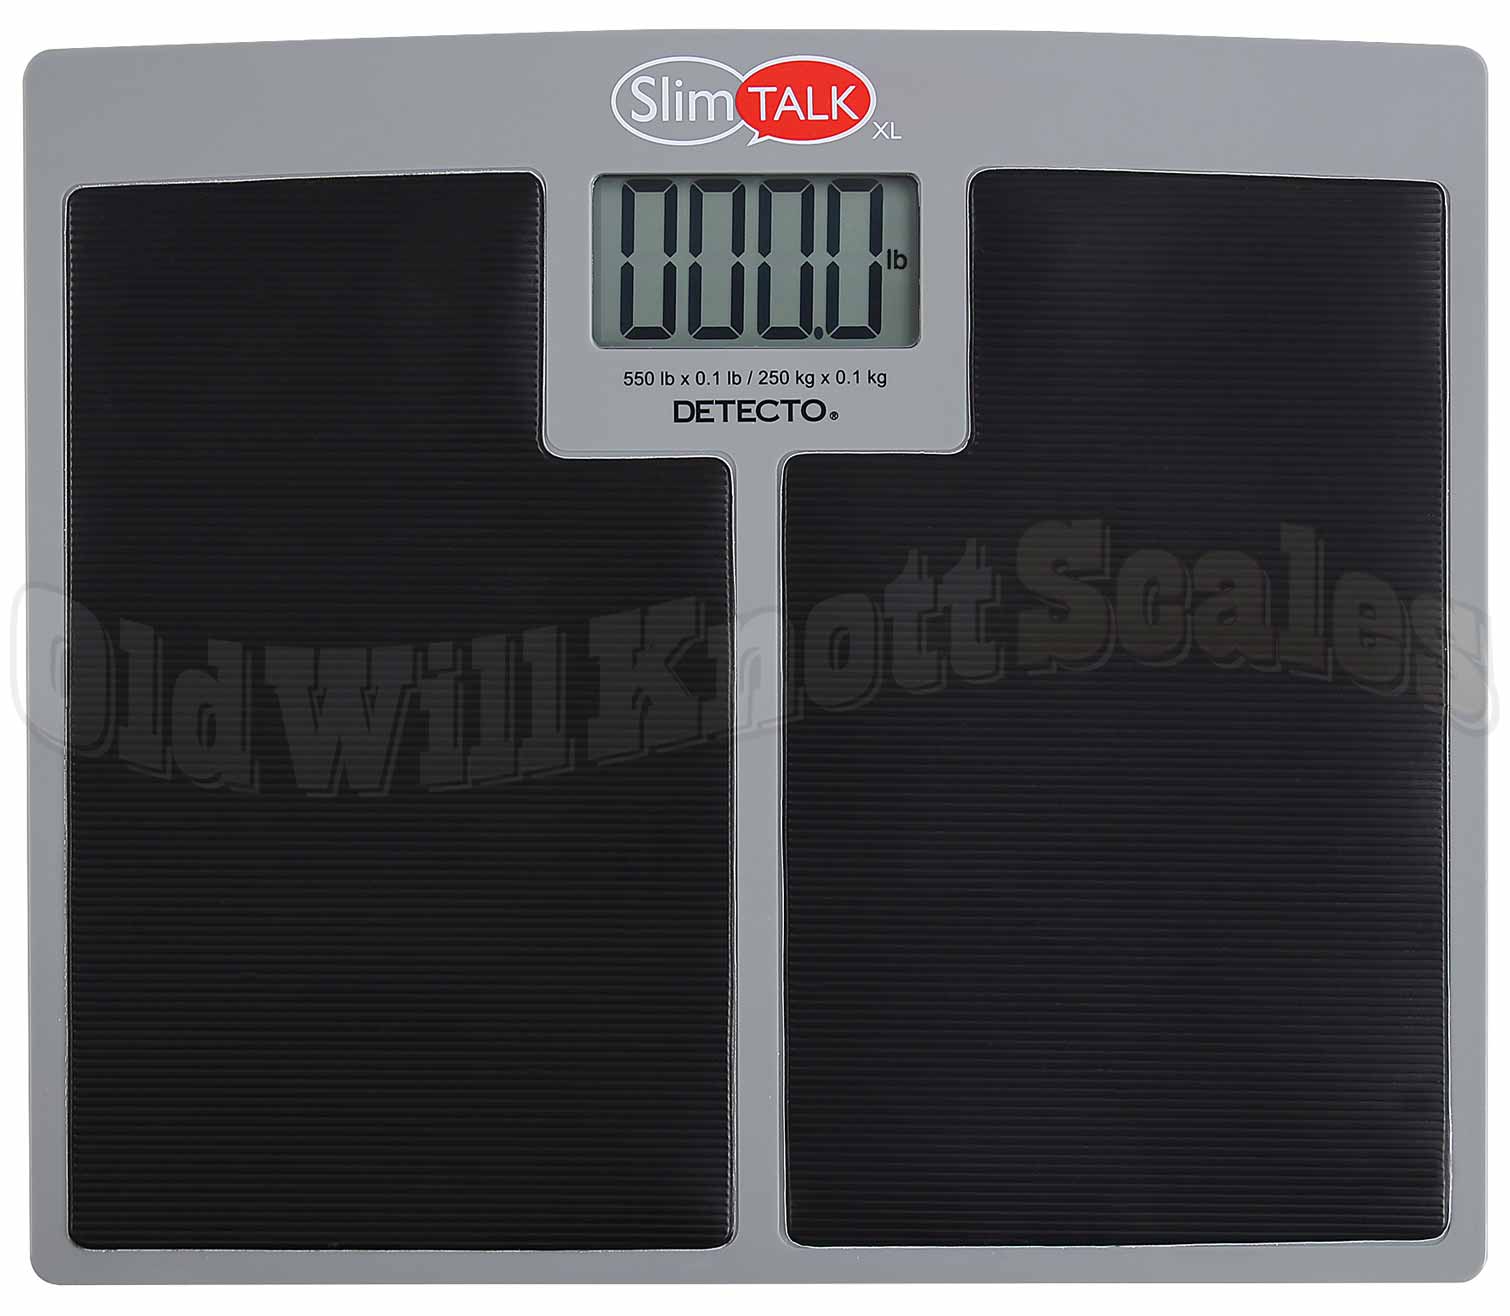 Talking Bariatric Scale